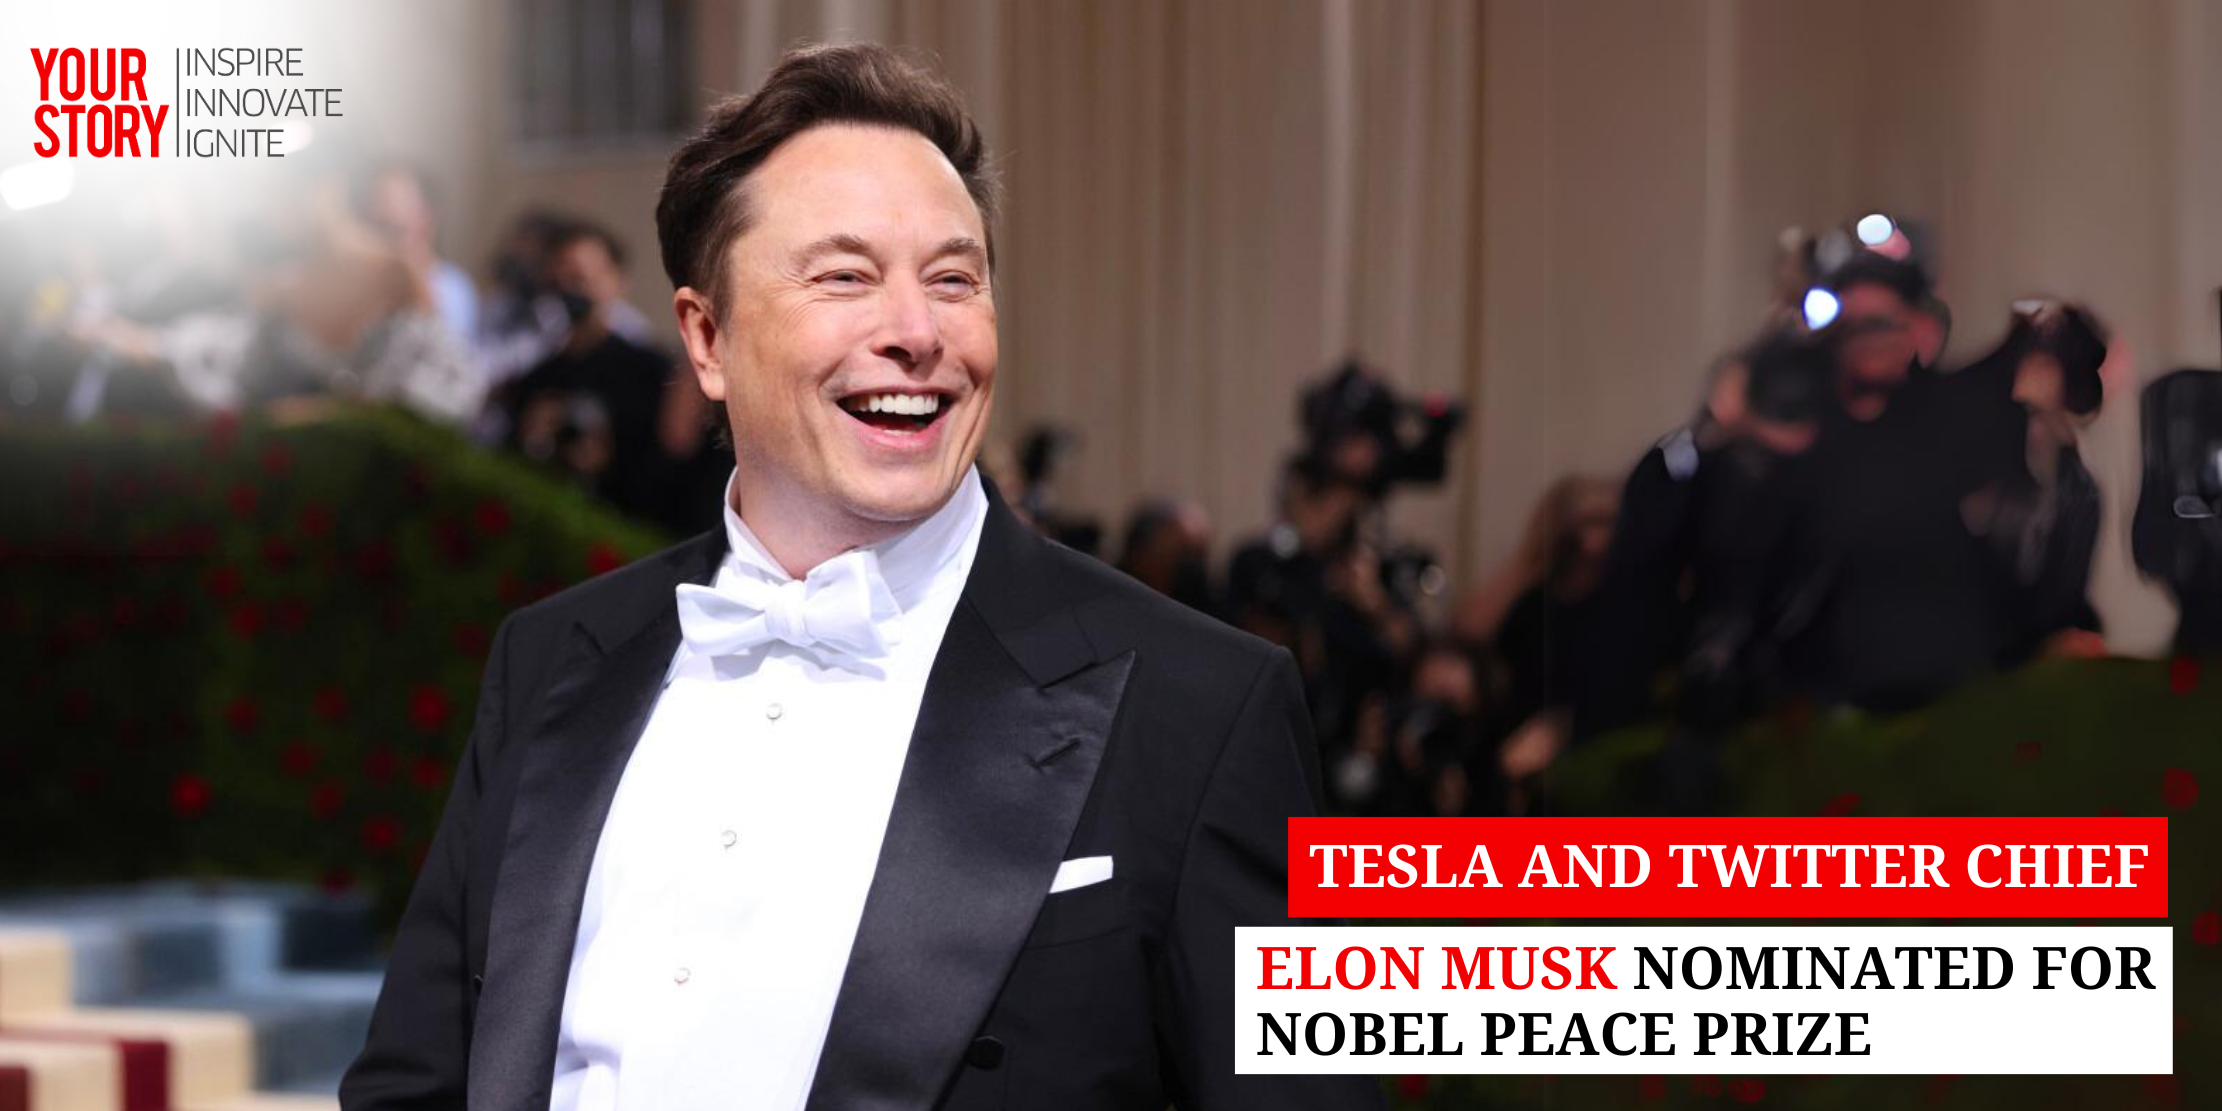 Tesla and Twitter Chief Elon Musk Nominated for Nobel Peace Prize